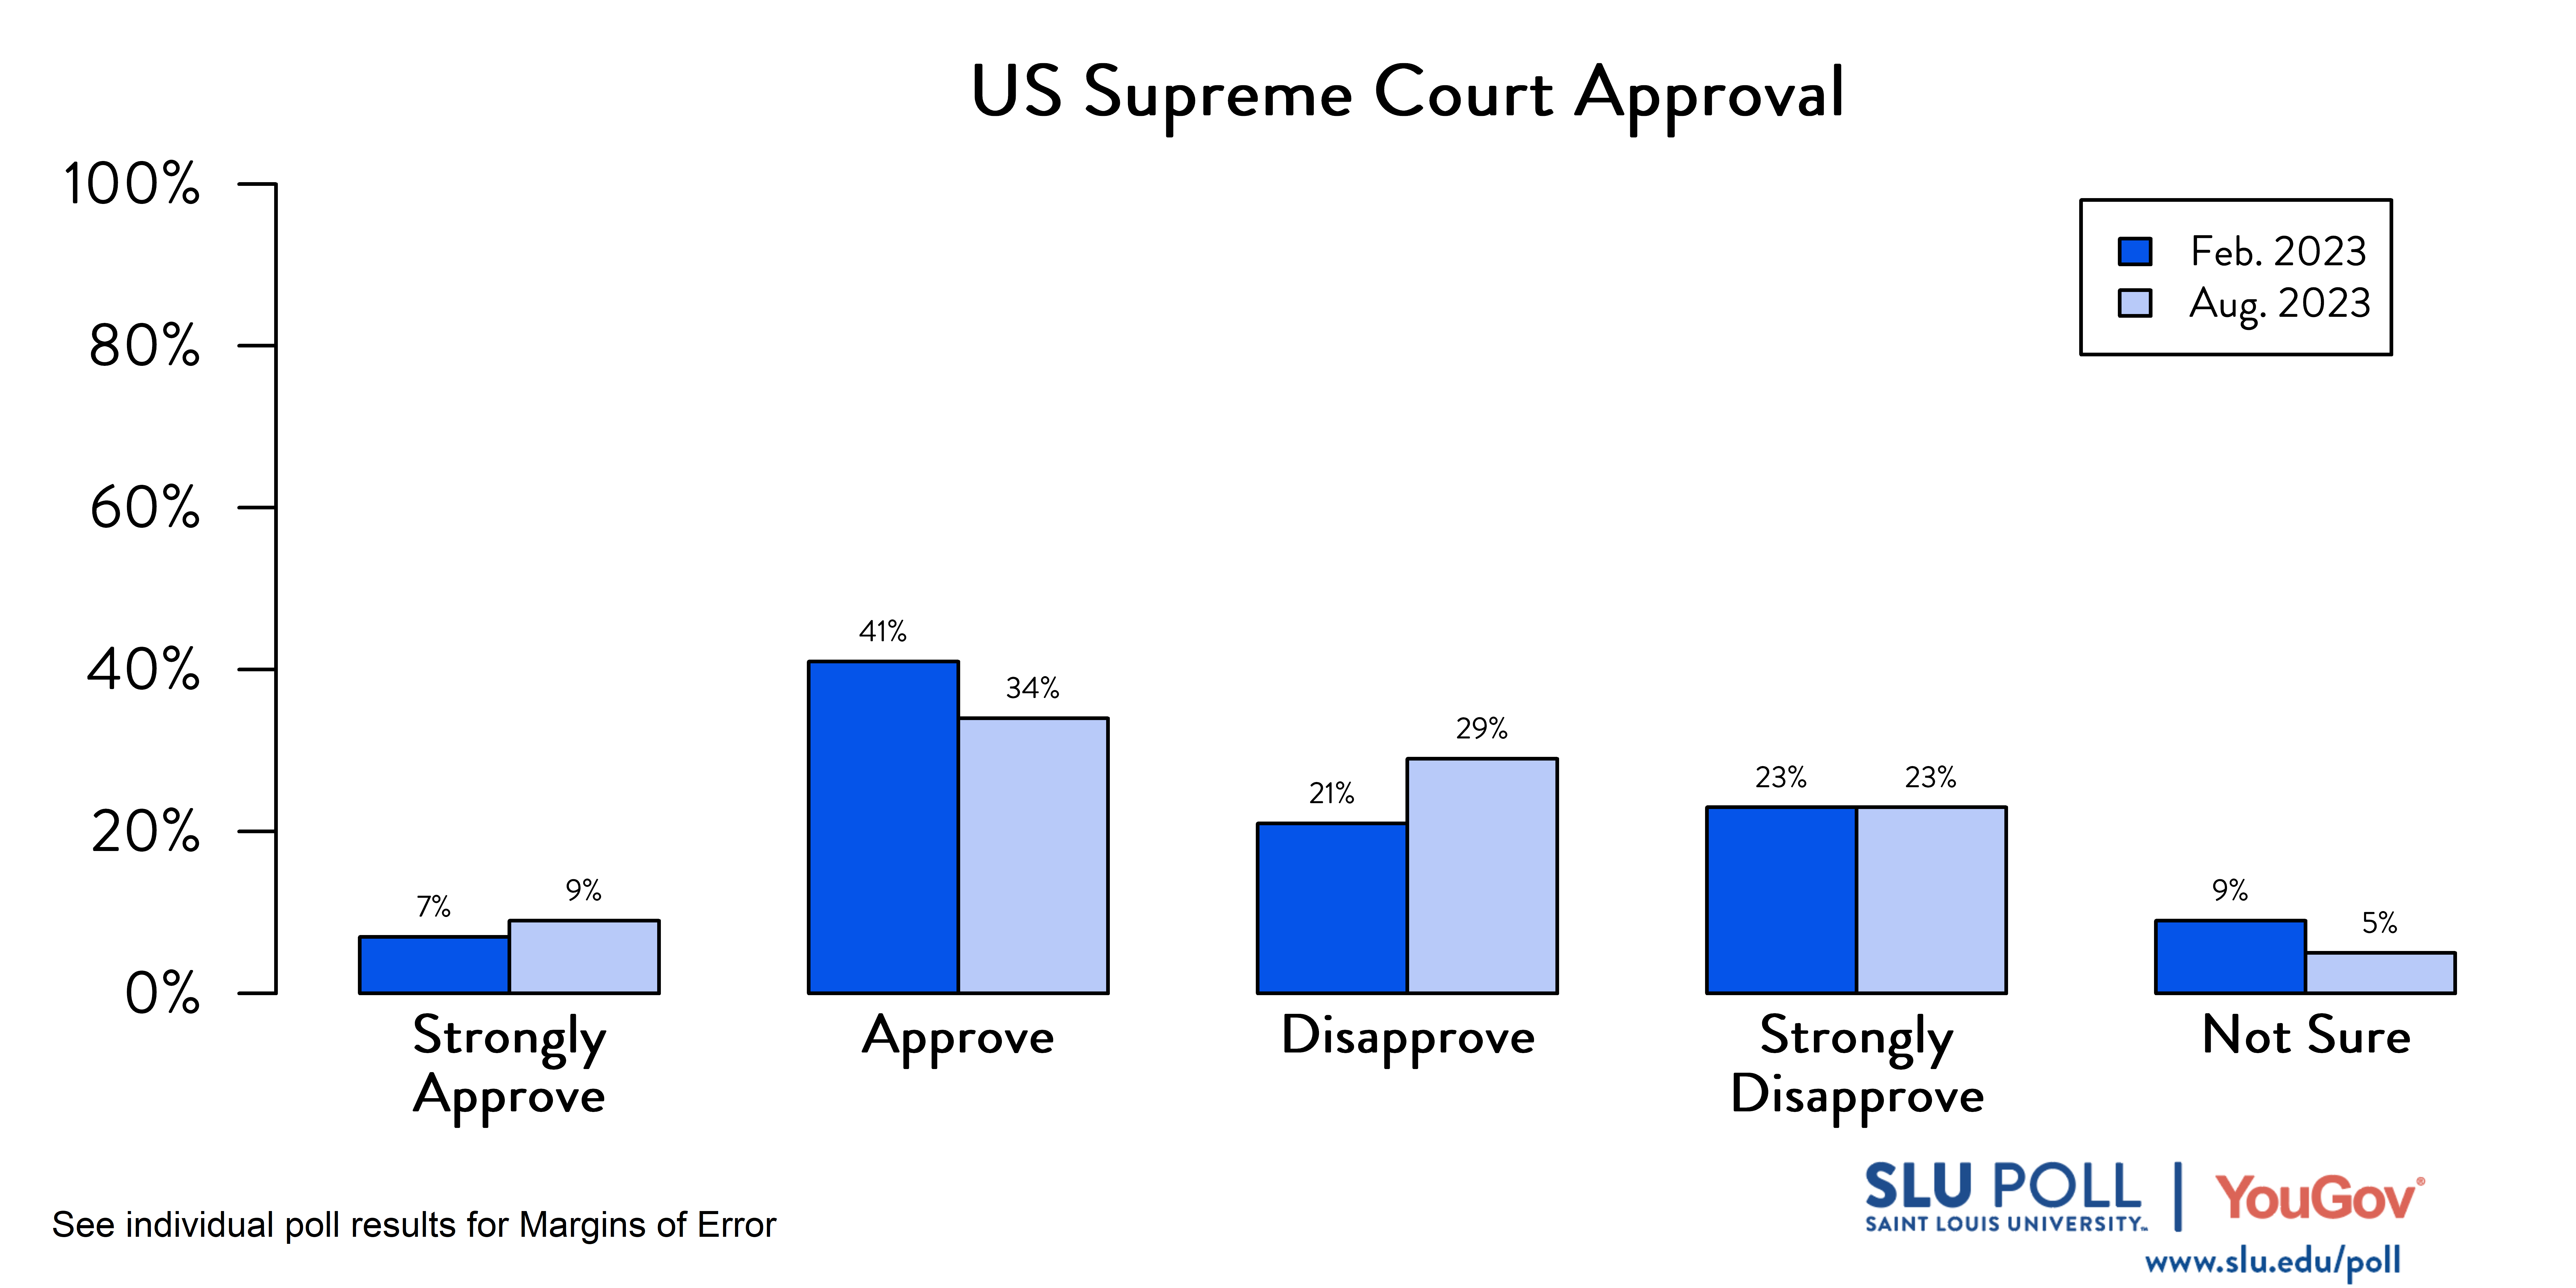 Likely voters' responses to 'Do you approve or disapprove of the way each is doing their job: The US Supreme Court?'. February 2023 Voter Responses: 7% Strongly approve, 41% Approve, 21% Disapprove, 23% Strongly disapprove, and 9% Not sure. August 2023 Voter Responses: 9% Strongly approve, 34% Approve, 29% Disapprove, 23% Strongly disapprove, and 5% Not sure.